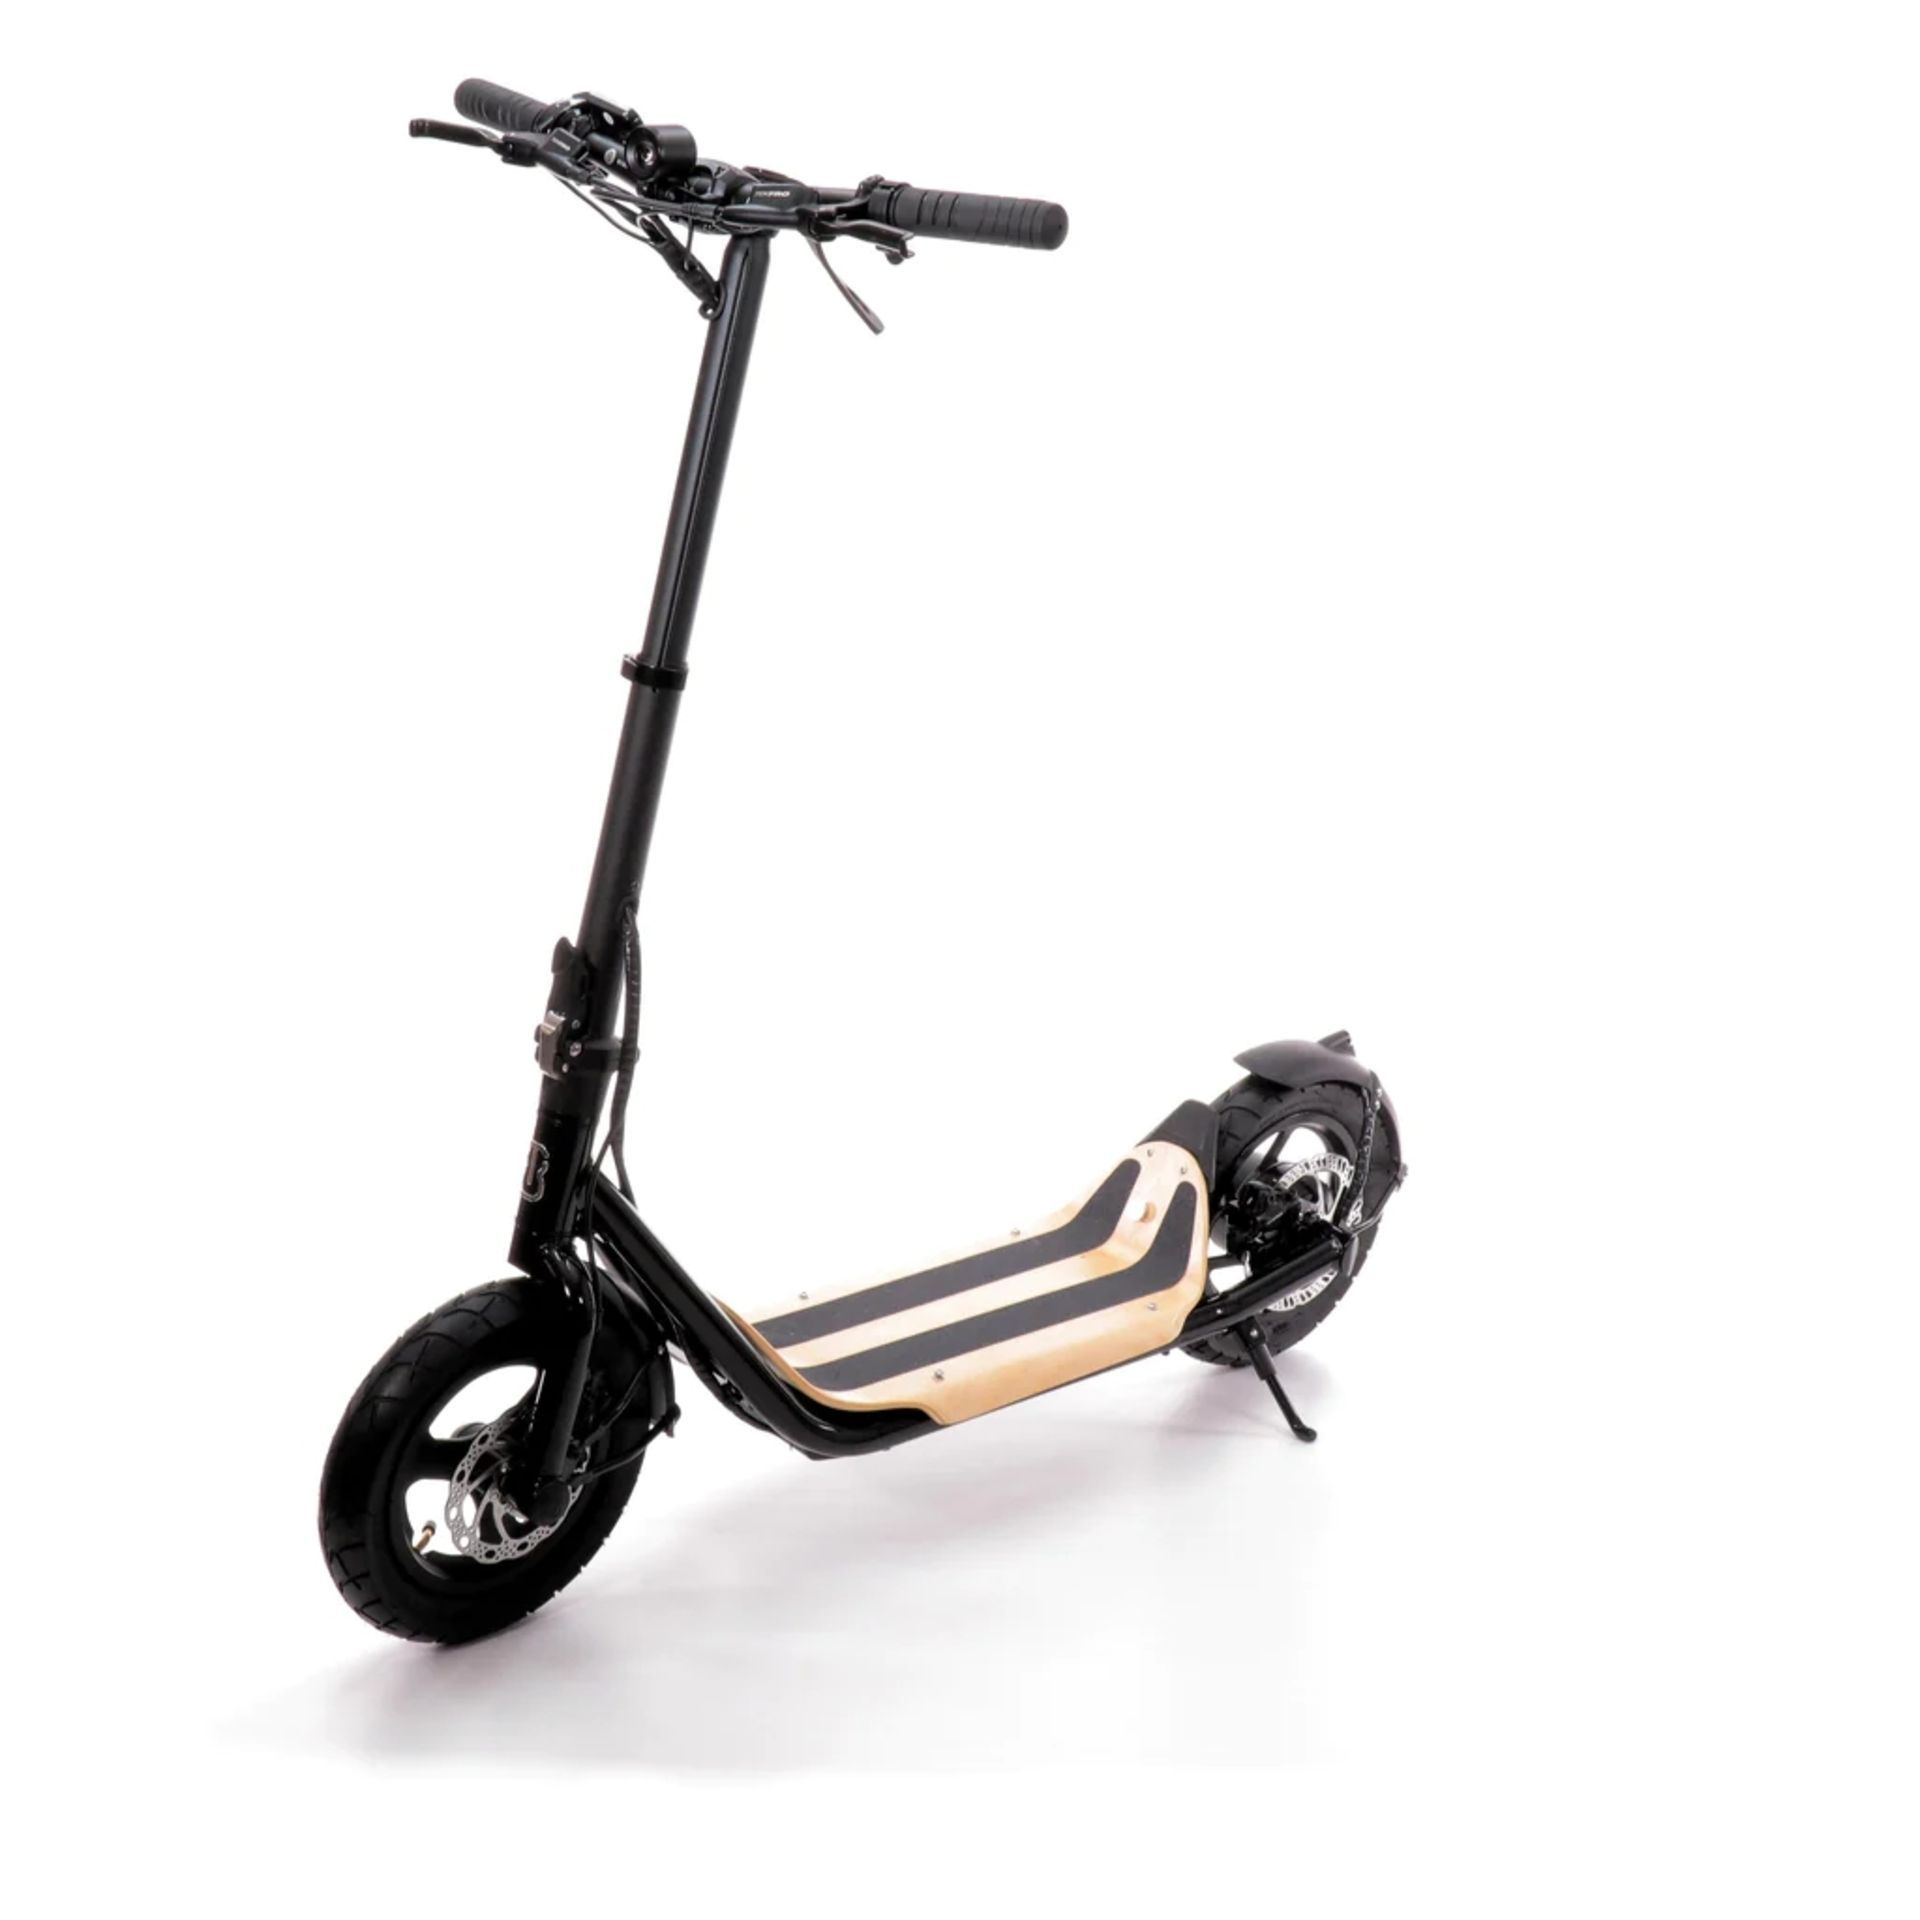 BRAND NEW 8TEV B12 PROXI ELECTRIC SCOOTER GLOSS BLACK RRP £1299, Perfect city commuter vehicle